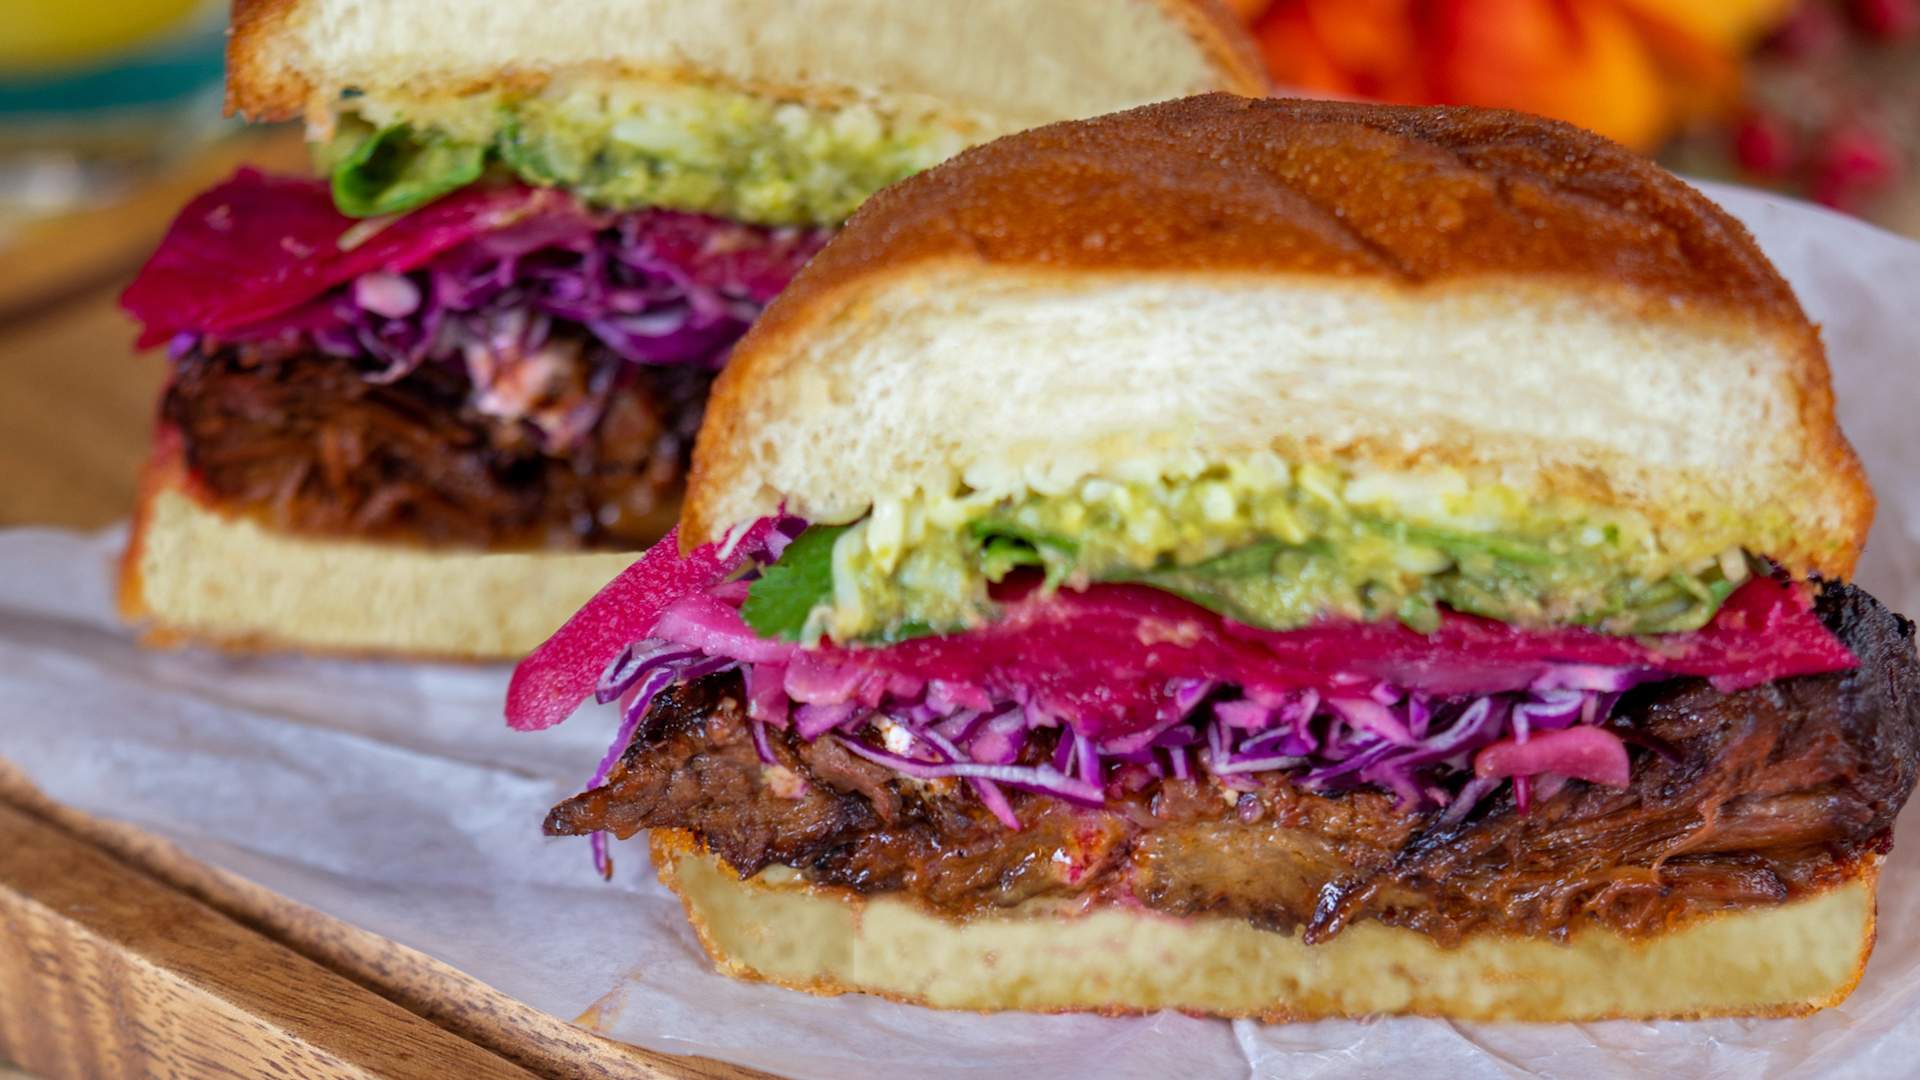 We're Giving Away a $200 Voucher to Try Mexico's New Menu